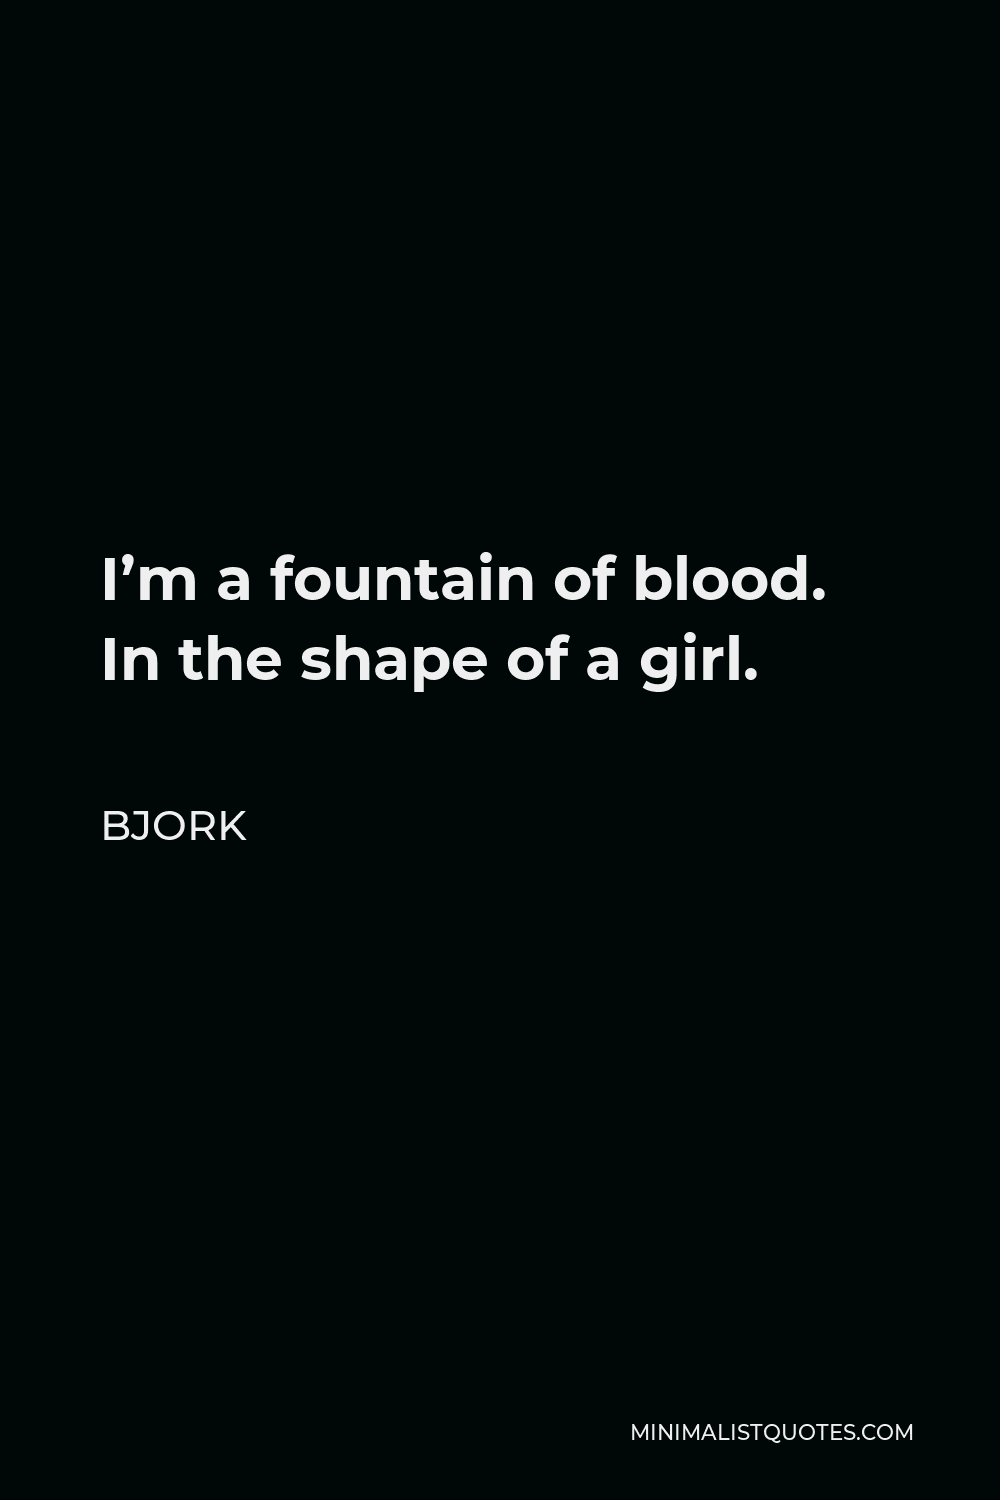 Bjork Quote - I’m a fountain of blood. In the shape of a girl.